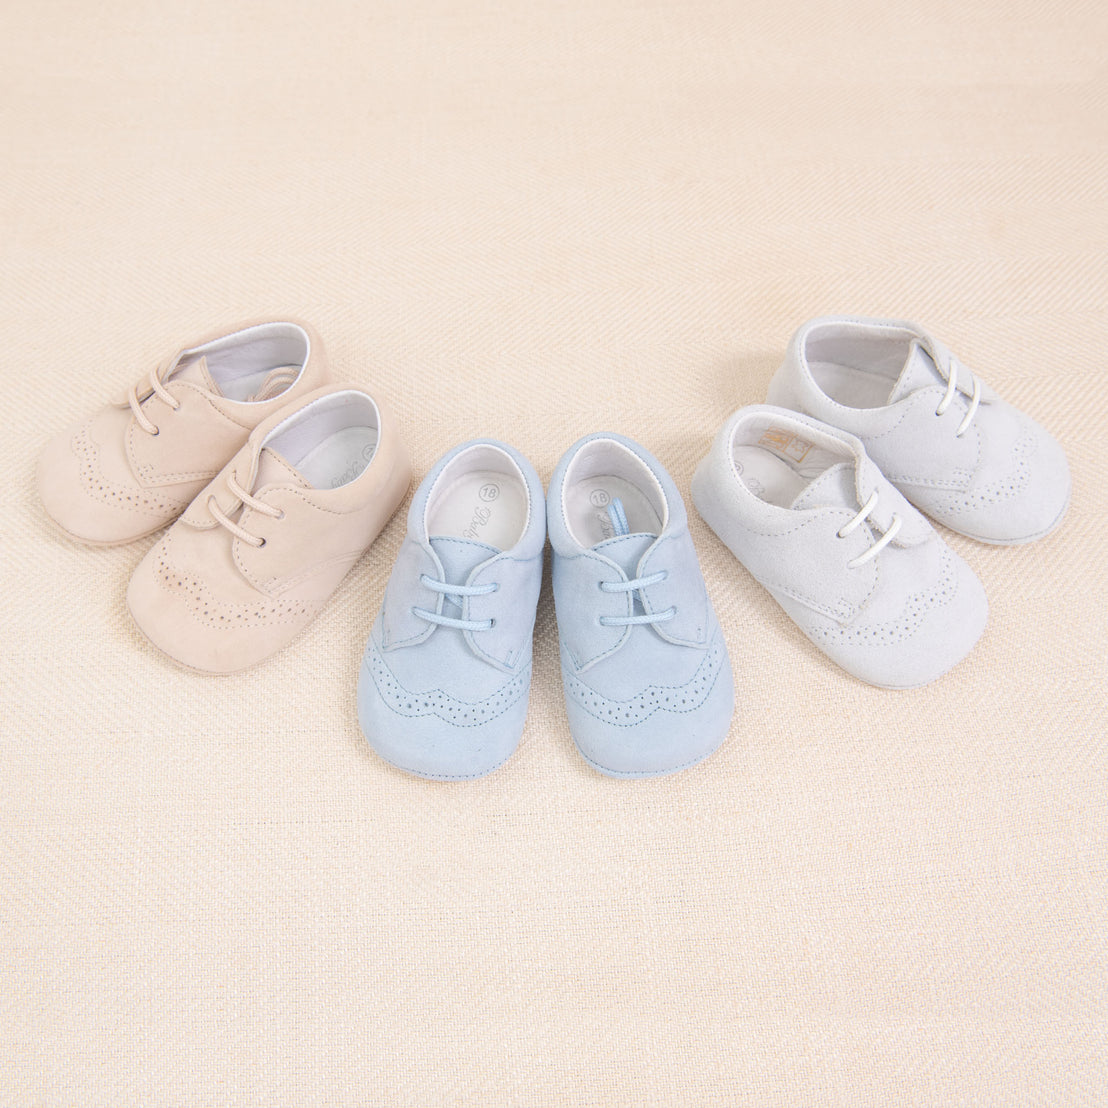 Three pairs of Baby Beau & Belle Boys Suede Shoes, two beige and one blue, arranged in a row on a beige textured background.